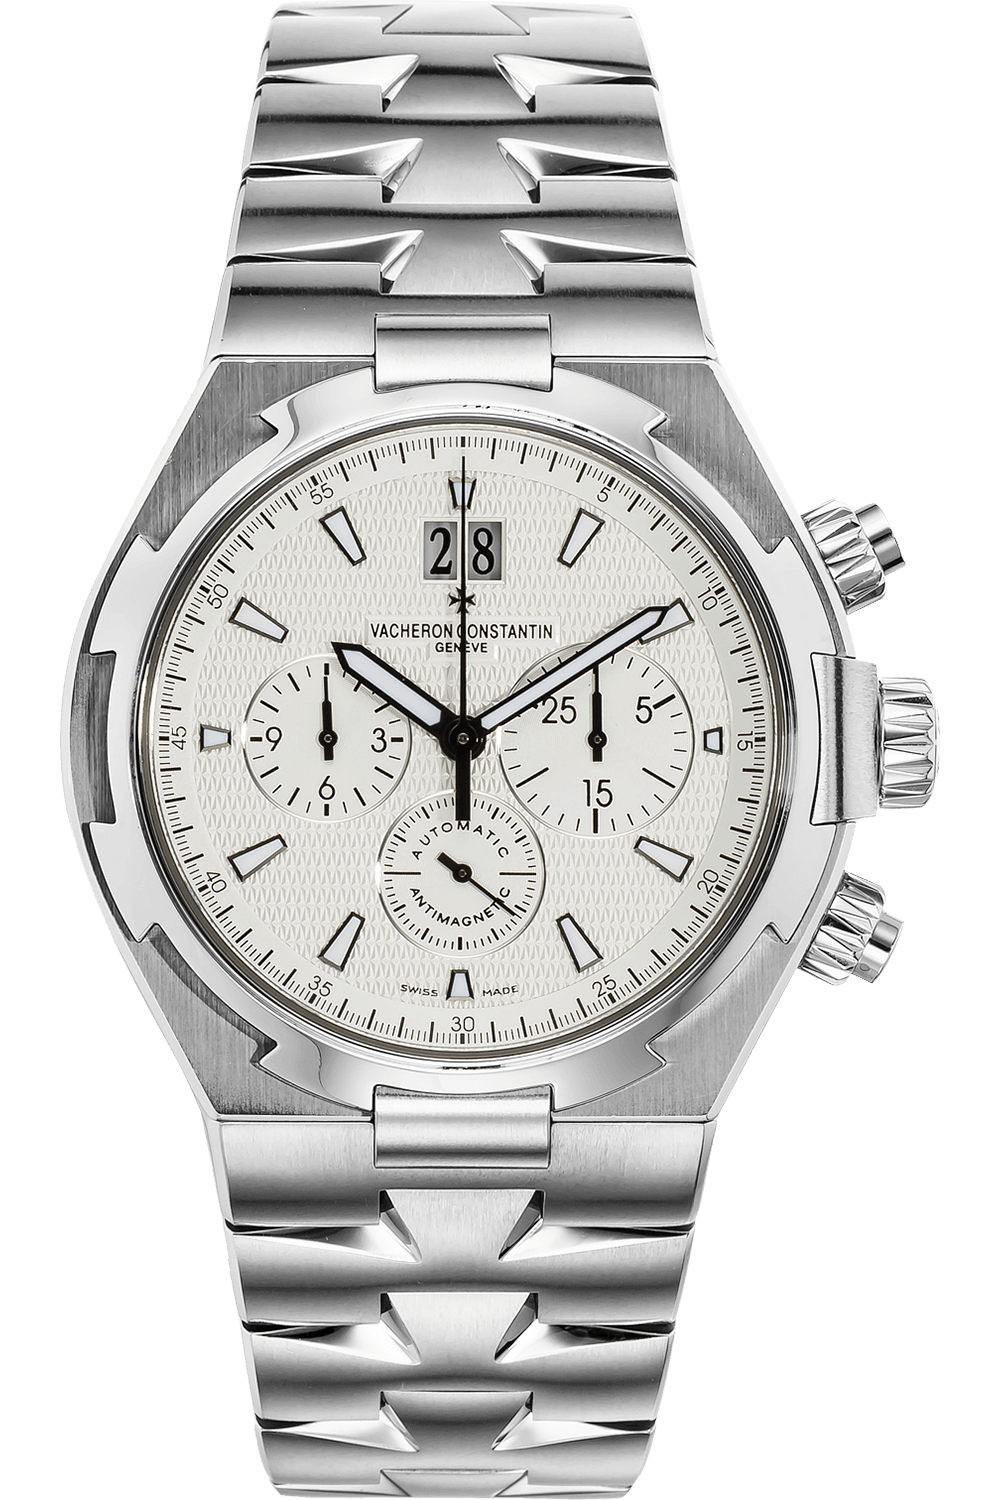 Hands-on with the Vacheron Constantin Overseas Chronograph - Monochrome  Watches